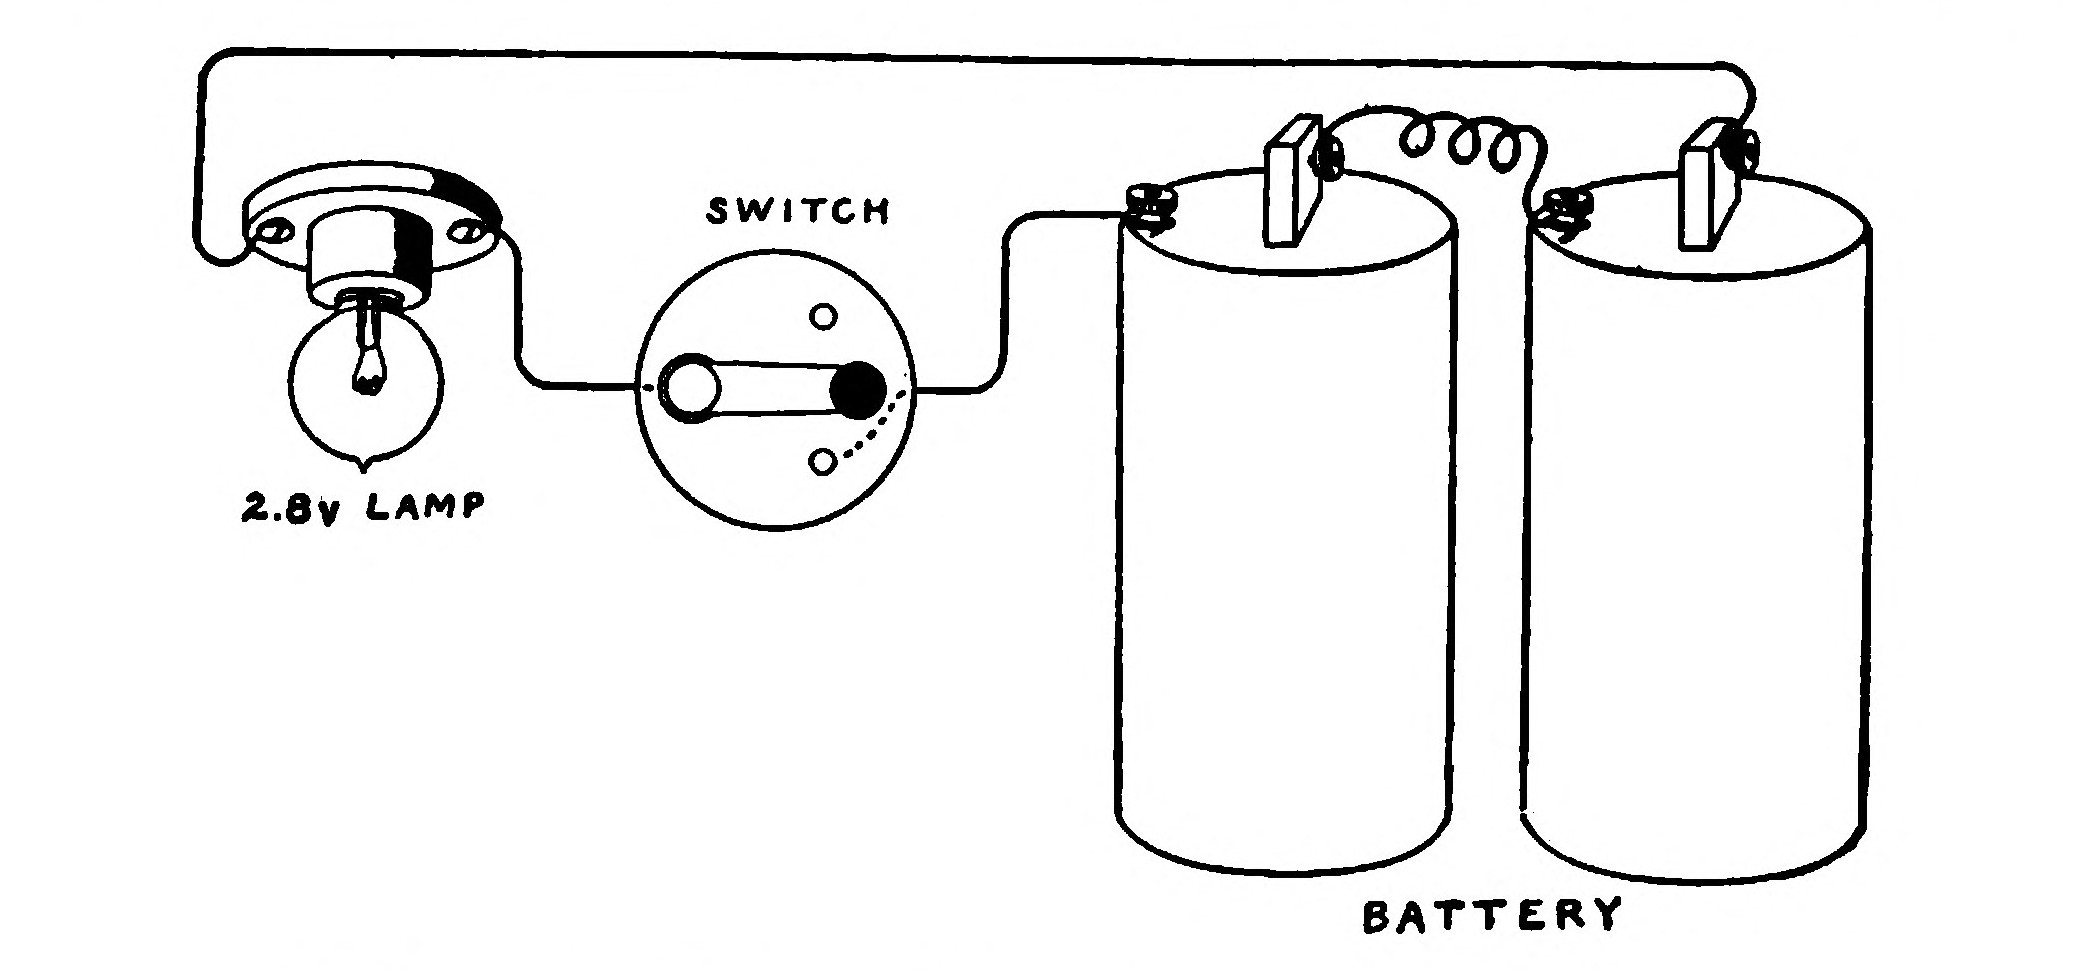 FIG. 156.—Connections for a 2.8 Volt Lamp.